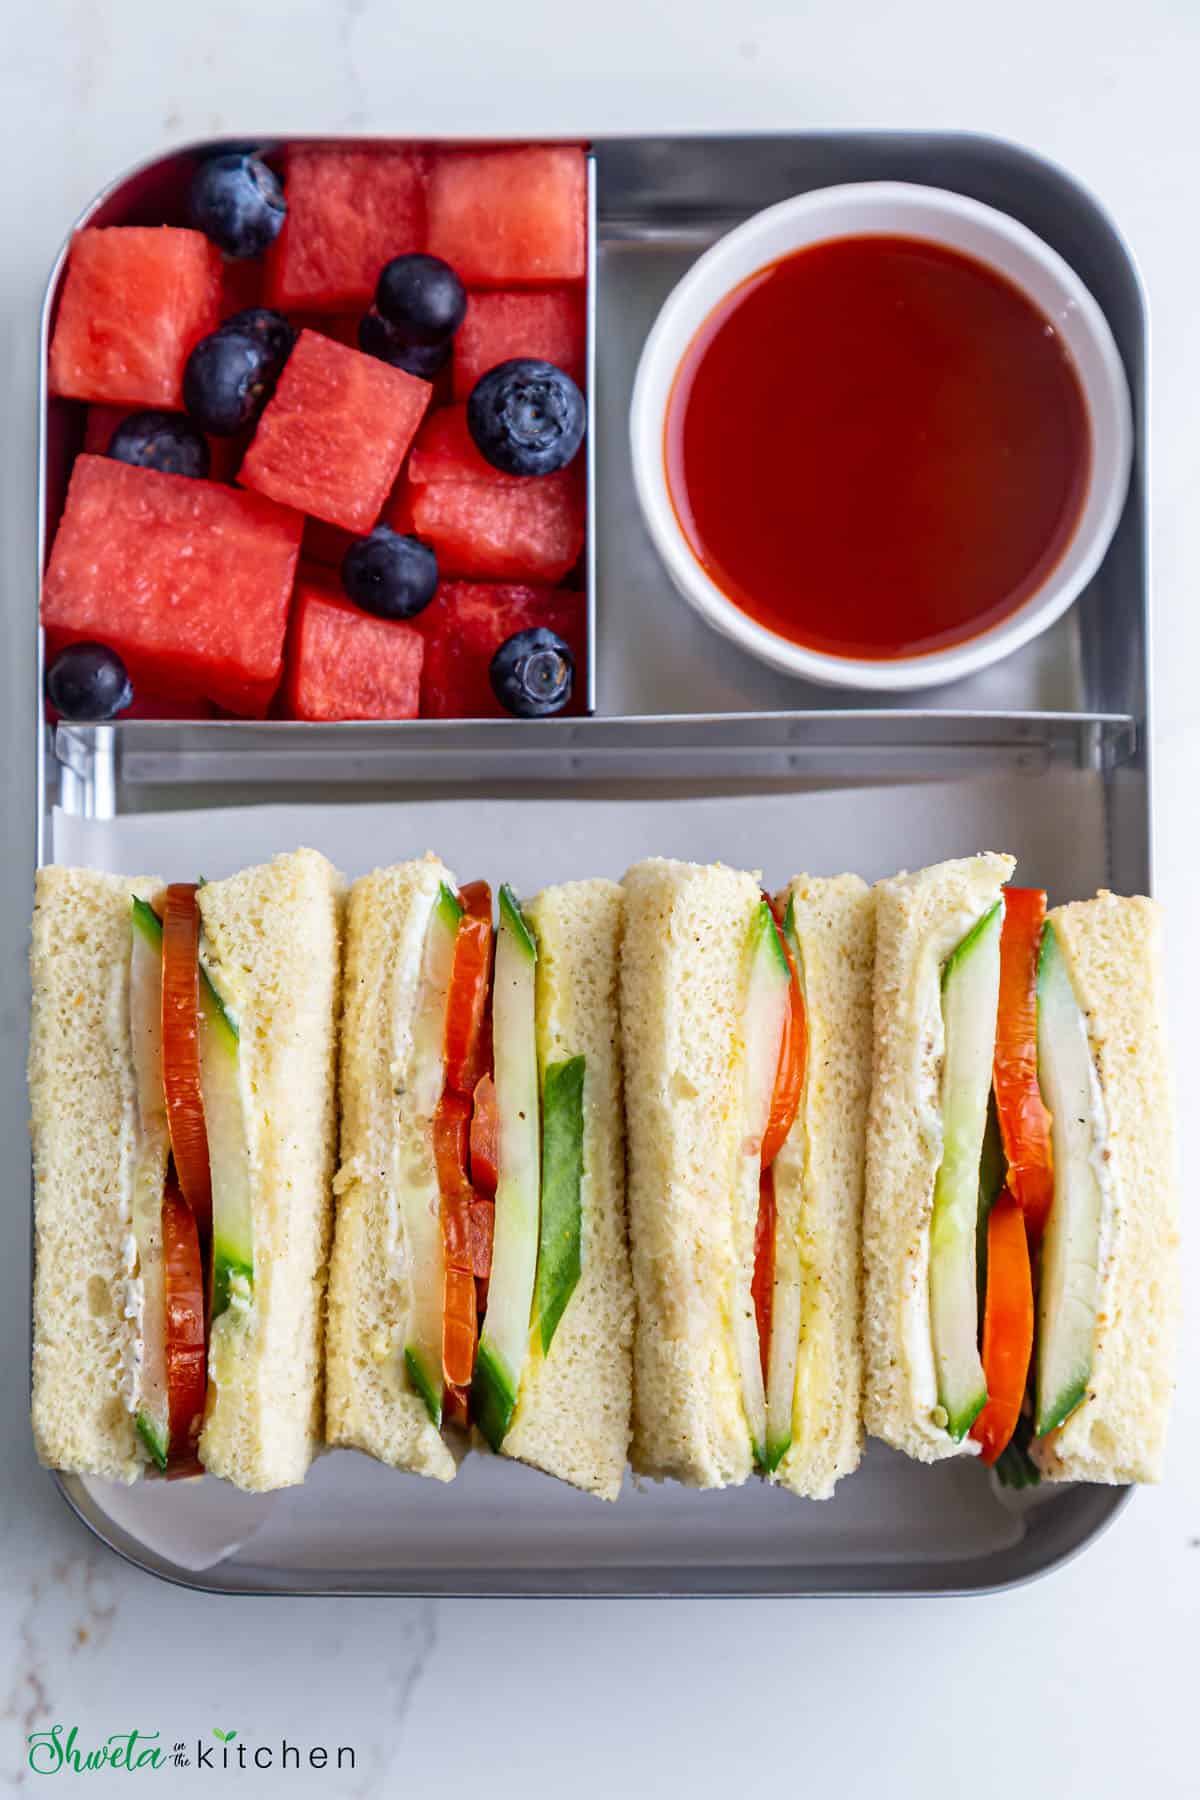 tomato cucumber sandwich packed in lunchbox with fruits and ketchup